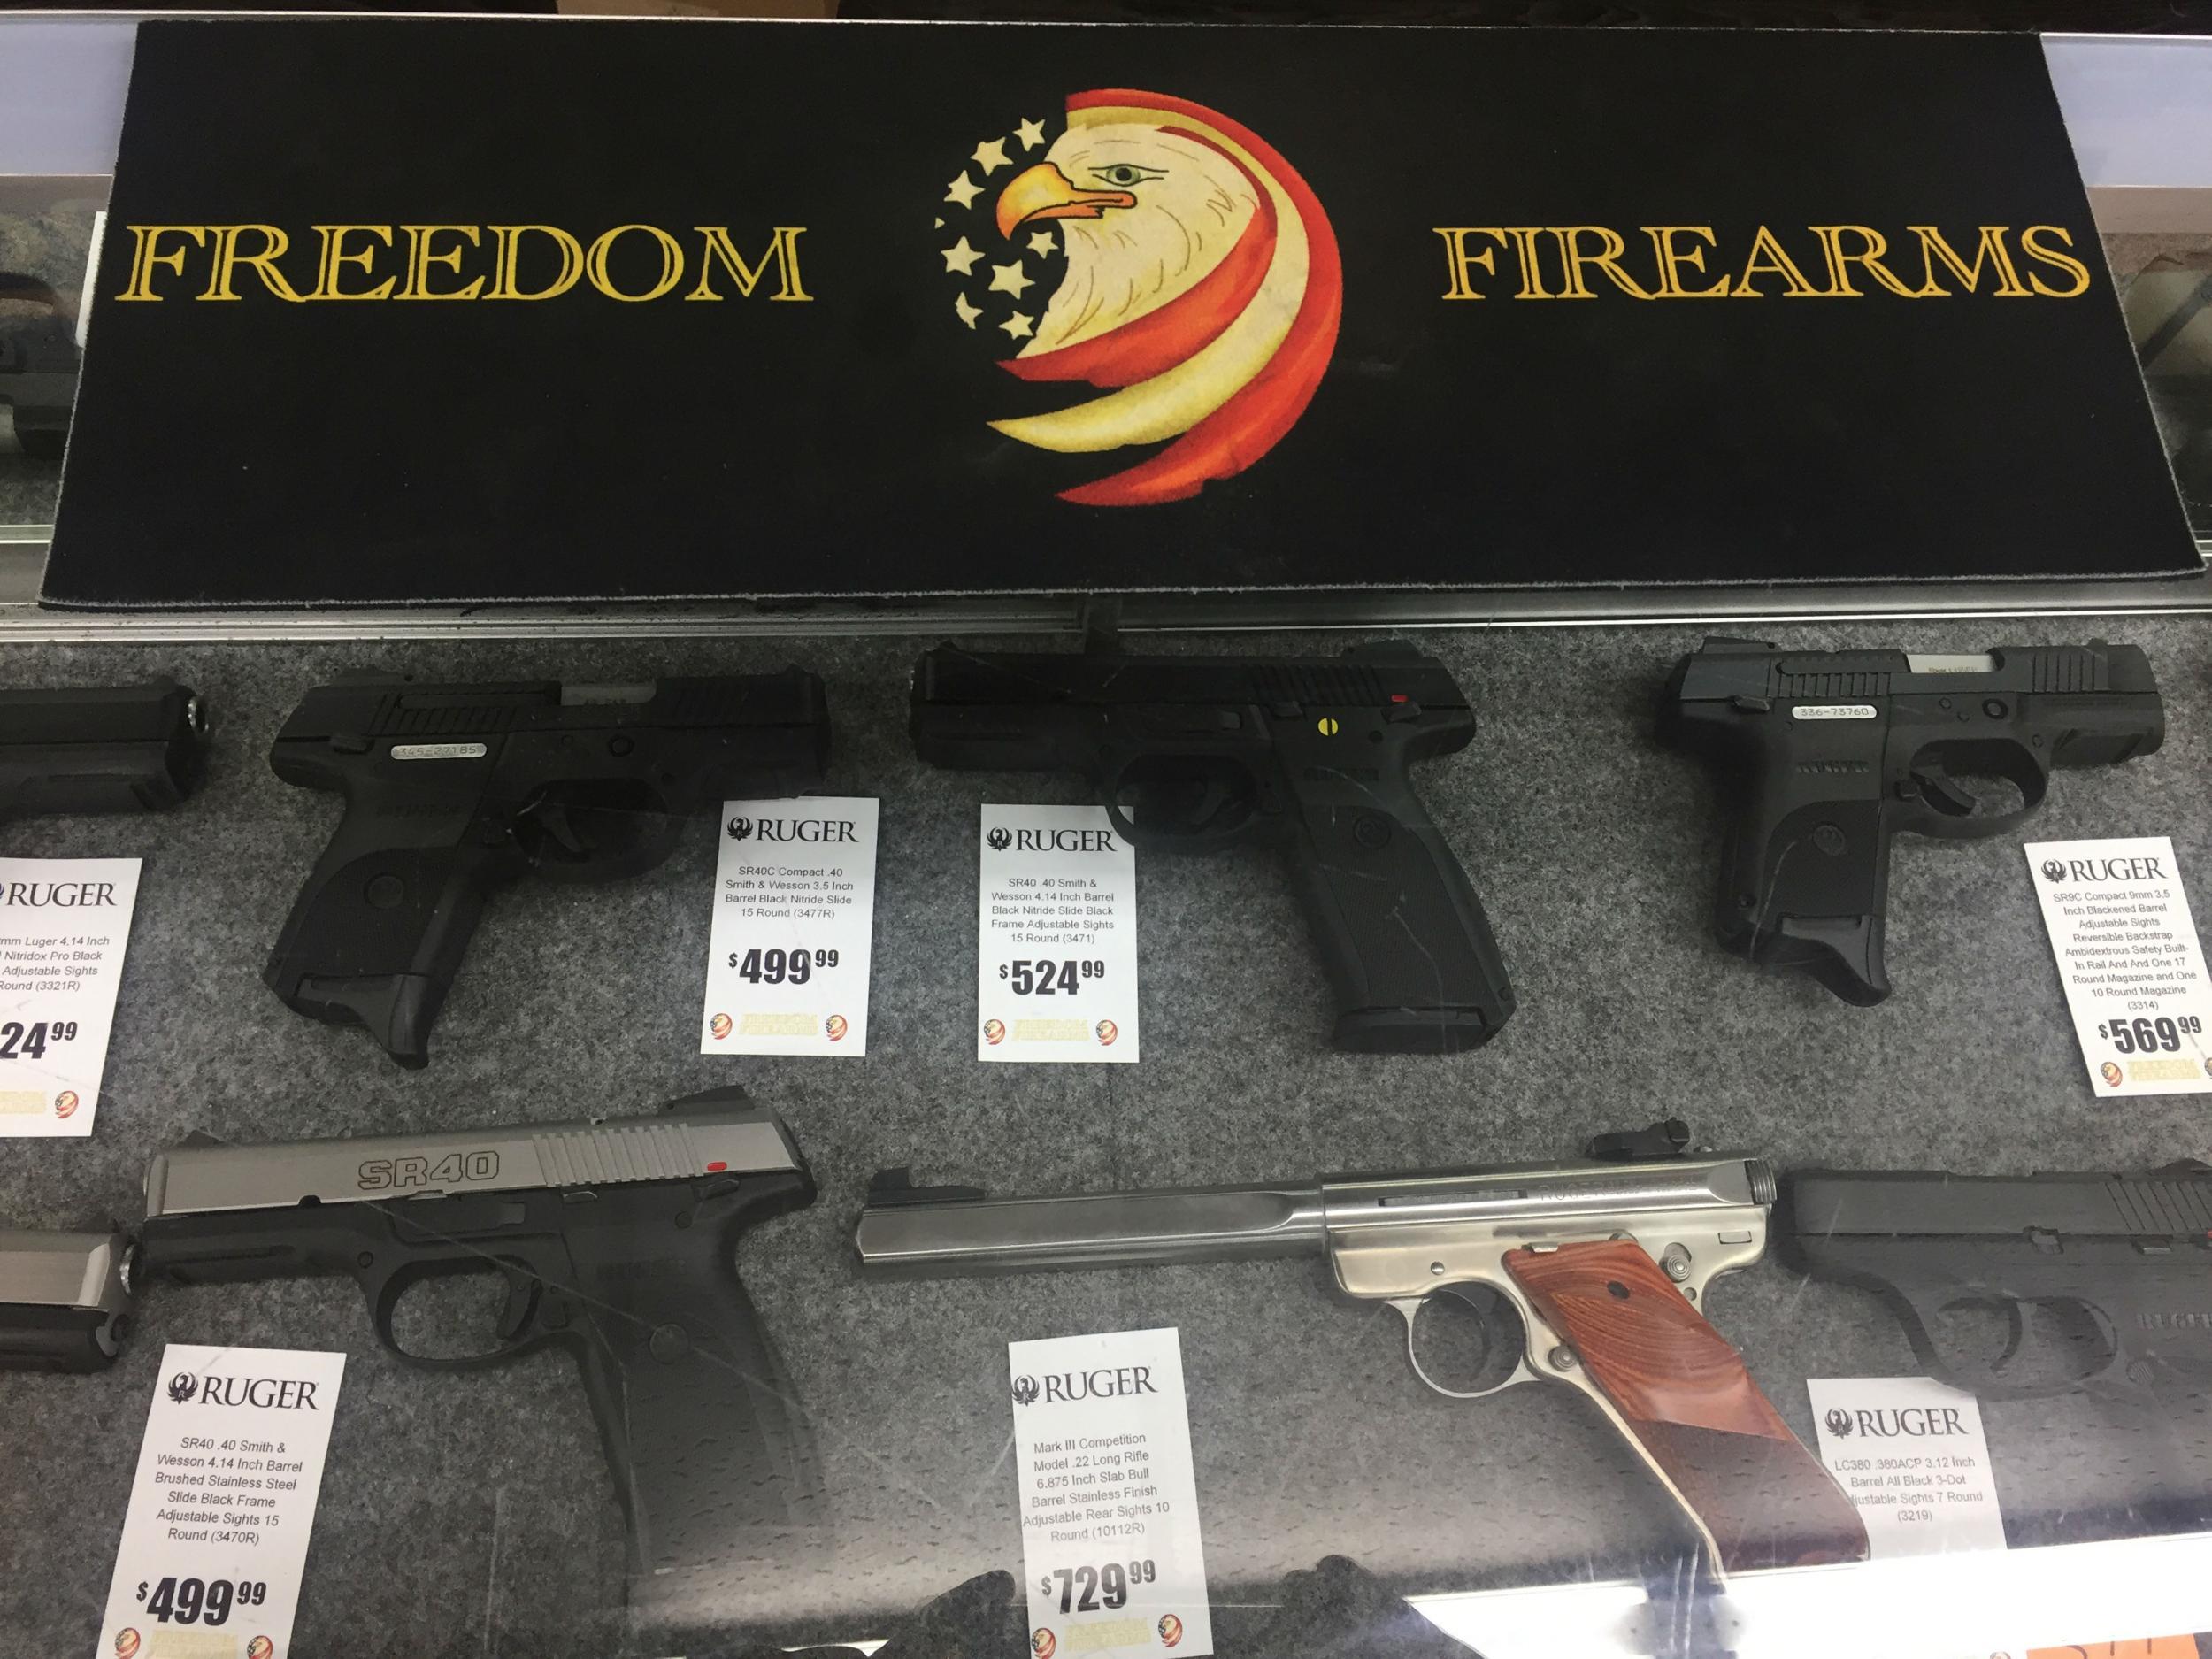 Rugers on display this week at Freedom Firearms which is bracing for "crazy days" if Clinton wins